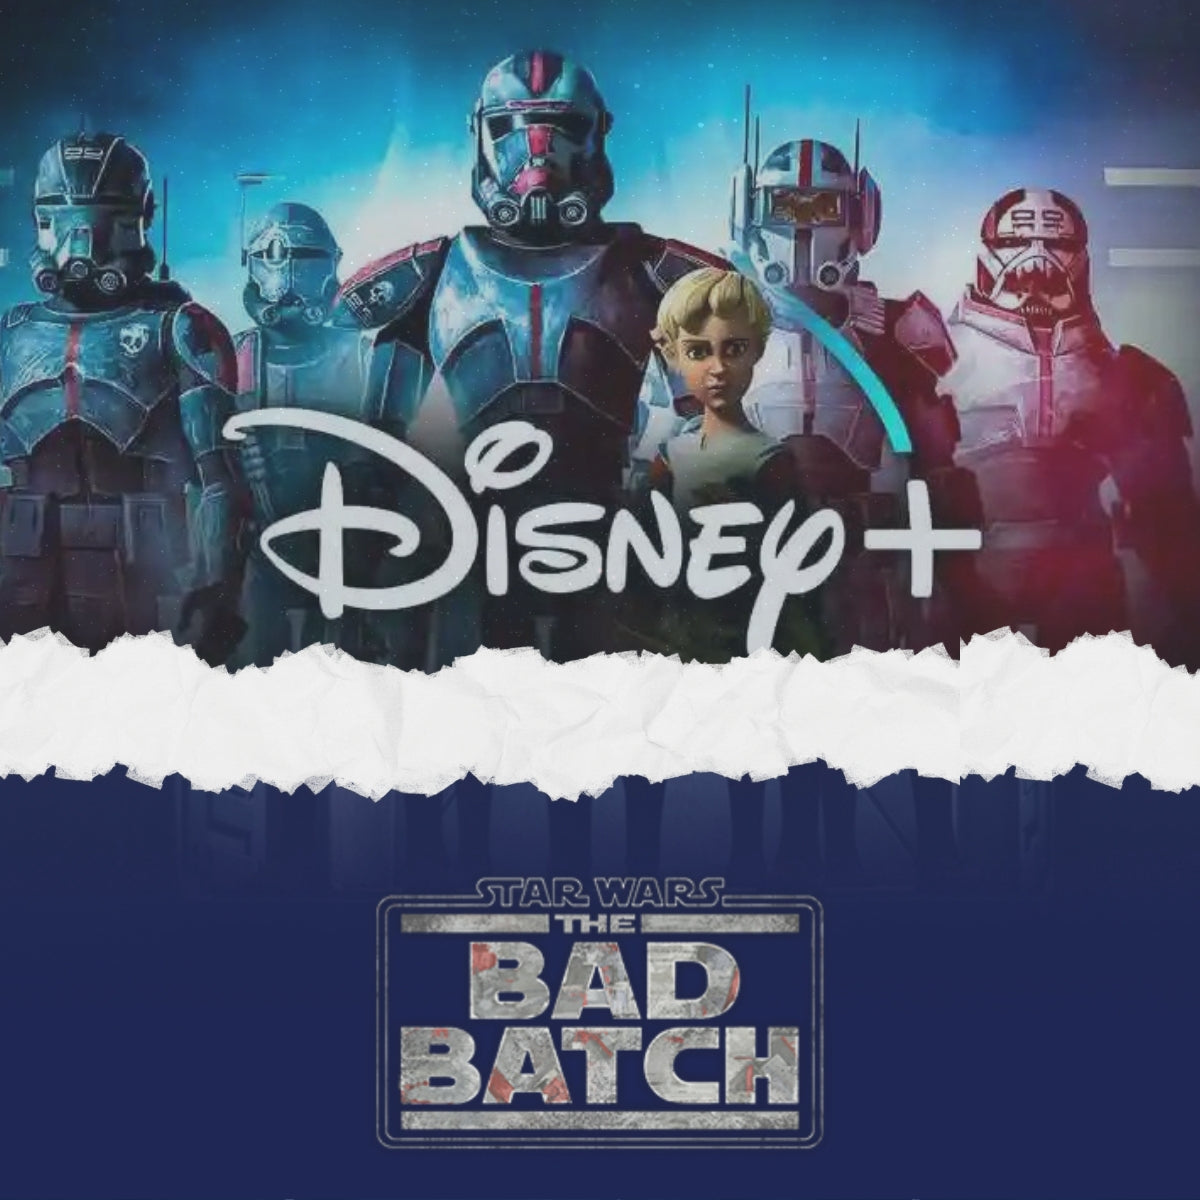 Breaking News: Release Date Unveiled for Star Wars: The Bad Batch Season 3 – Get Ready for the Excitement!